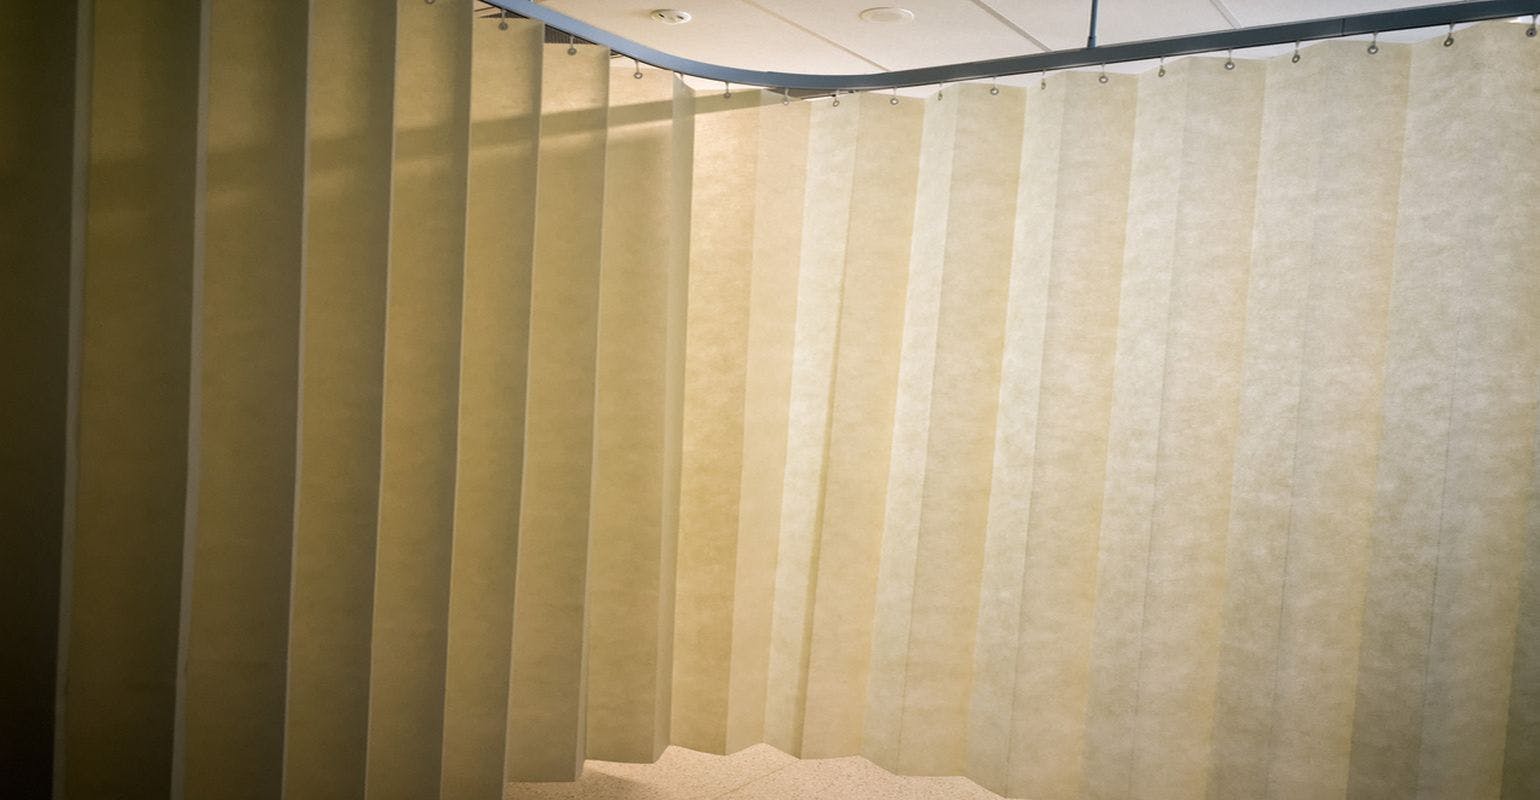 New Study Says Hospital Privacy Curtains May Harbor Infectious Pathogens